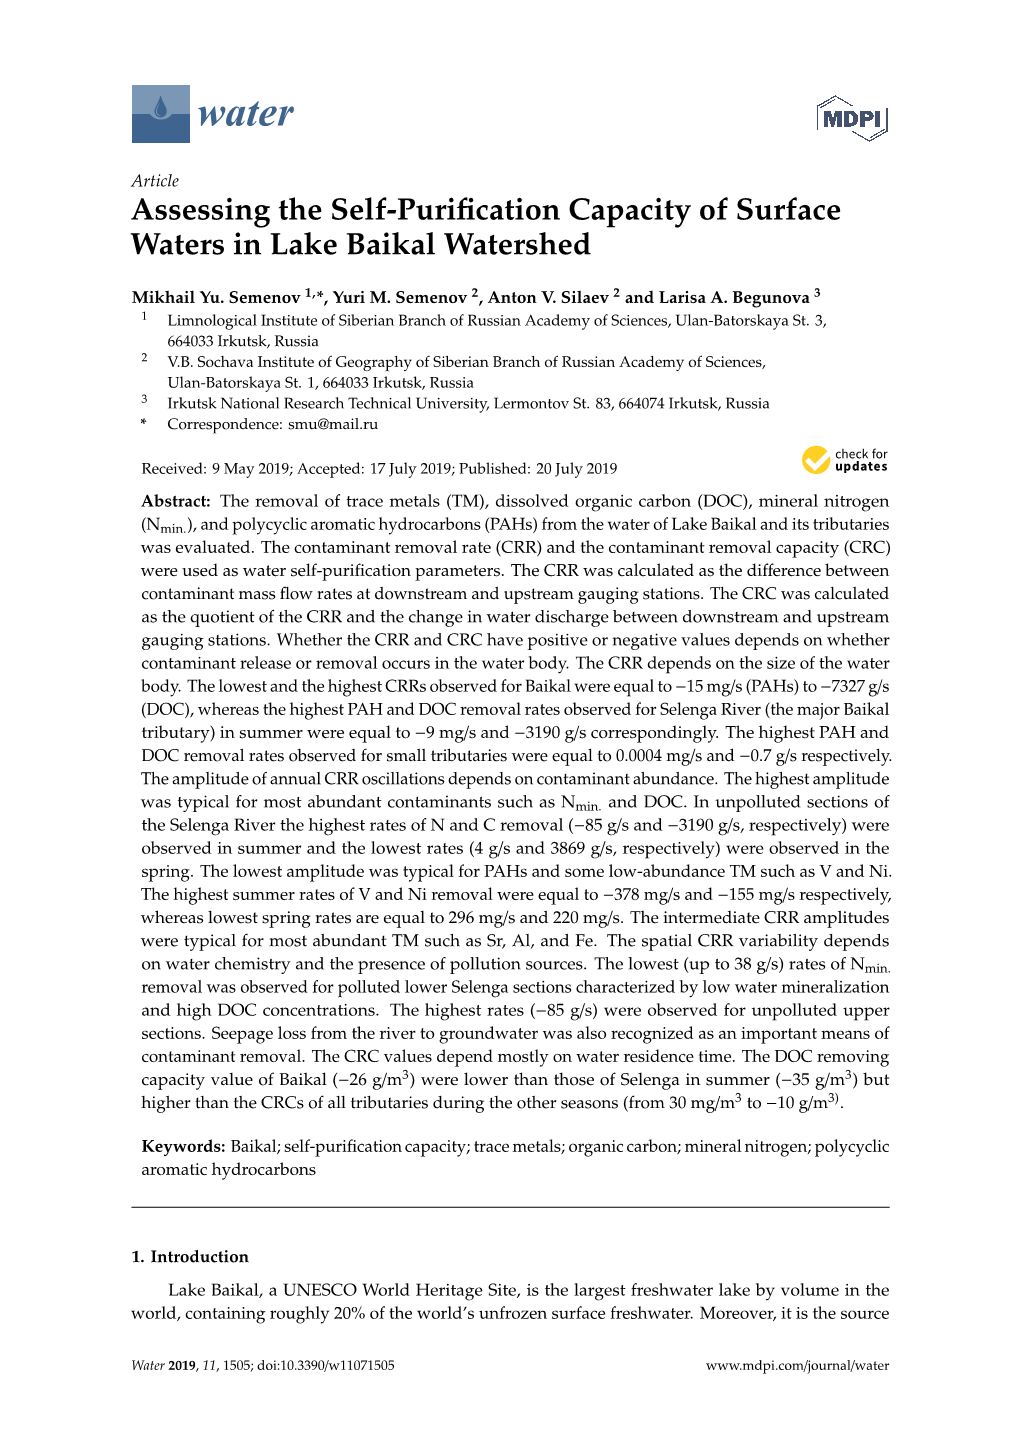 Assessing the Self-Purification Capacity of Surface Waters in Lake